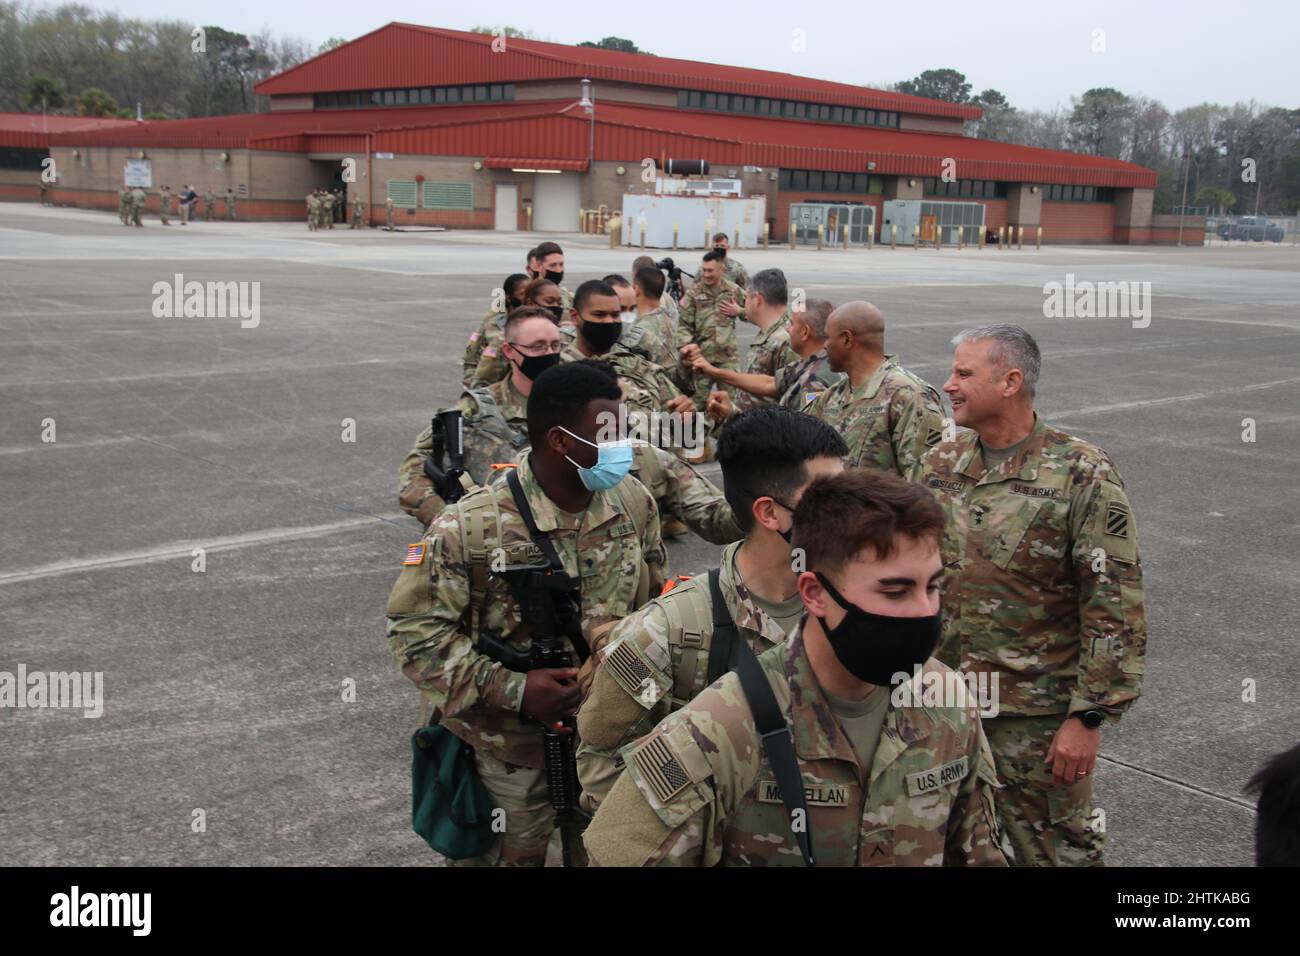 Savannah, United States. 27th Feb, 2022. U.S. Army soldiers, assigned to the 1st Armored Brigade Combat Team, 3rd Infantry Division, are fist bumped by commanding officers as they board a civilian aircraft for deployment to NATO countries from Hunter Army Airfield, February 27, 2022 in Savannah, Georgia. The soldiers are deploying to Eastern Europe in support of NATO allies and deter Russian aggression toward Ukraine. Credit: Capt. John D. Howard Jr/U.S Army/Alamy Live News Stock Photo